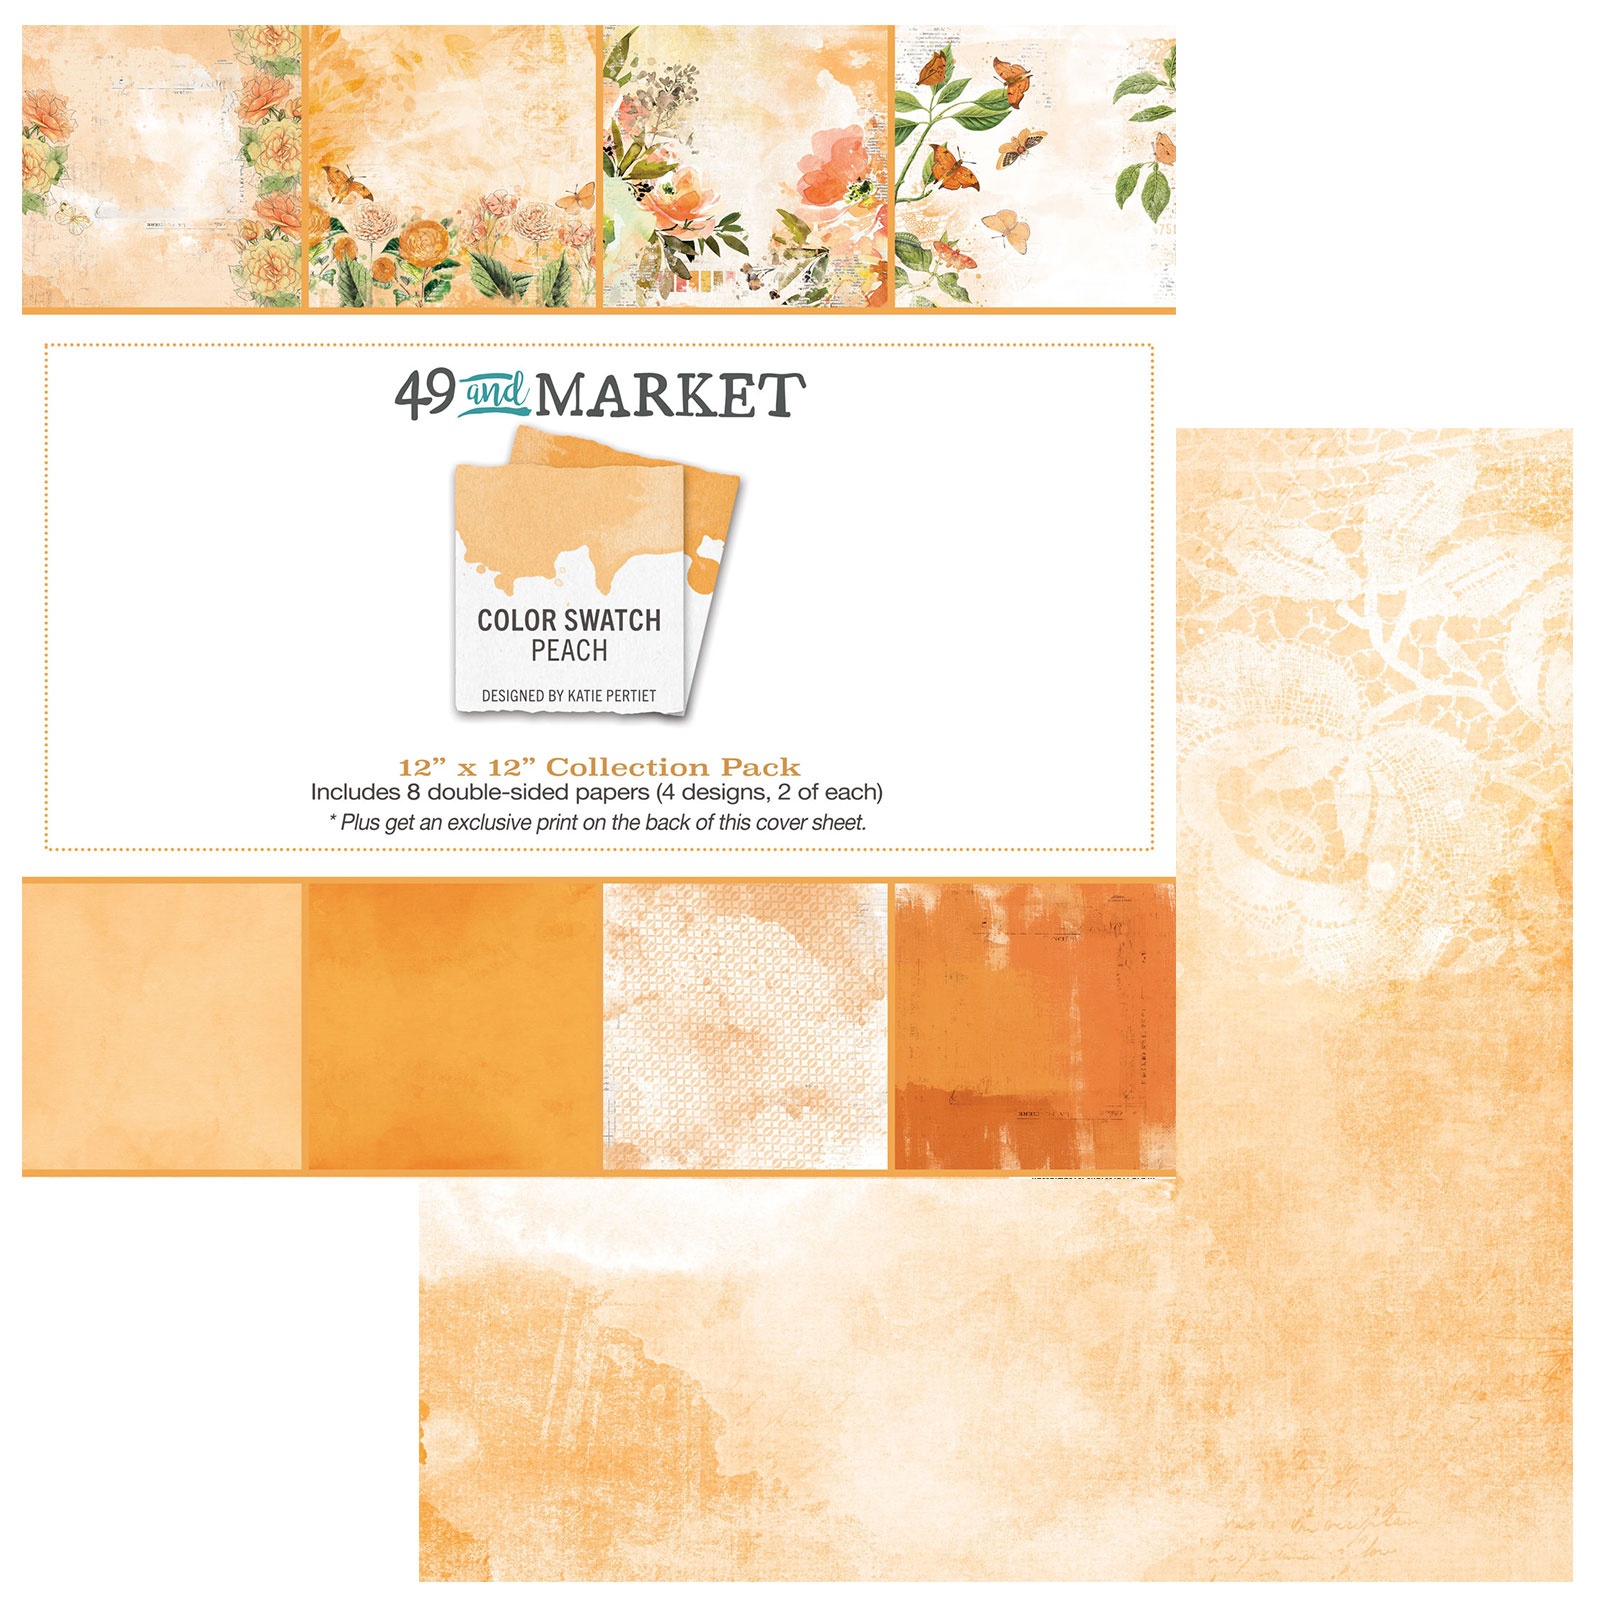 49 & Market Color Swatch Peach 12X12 Collection